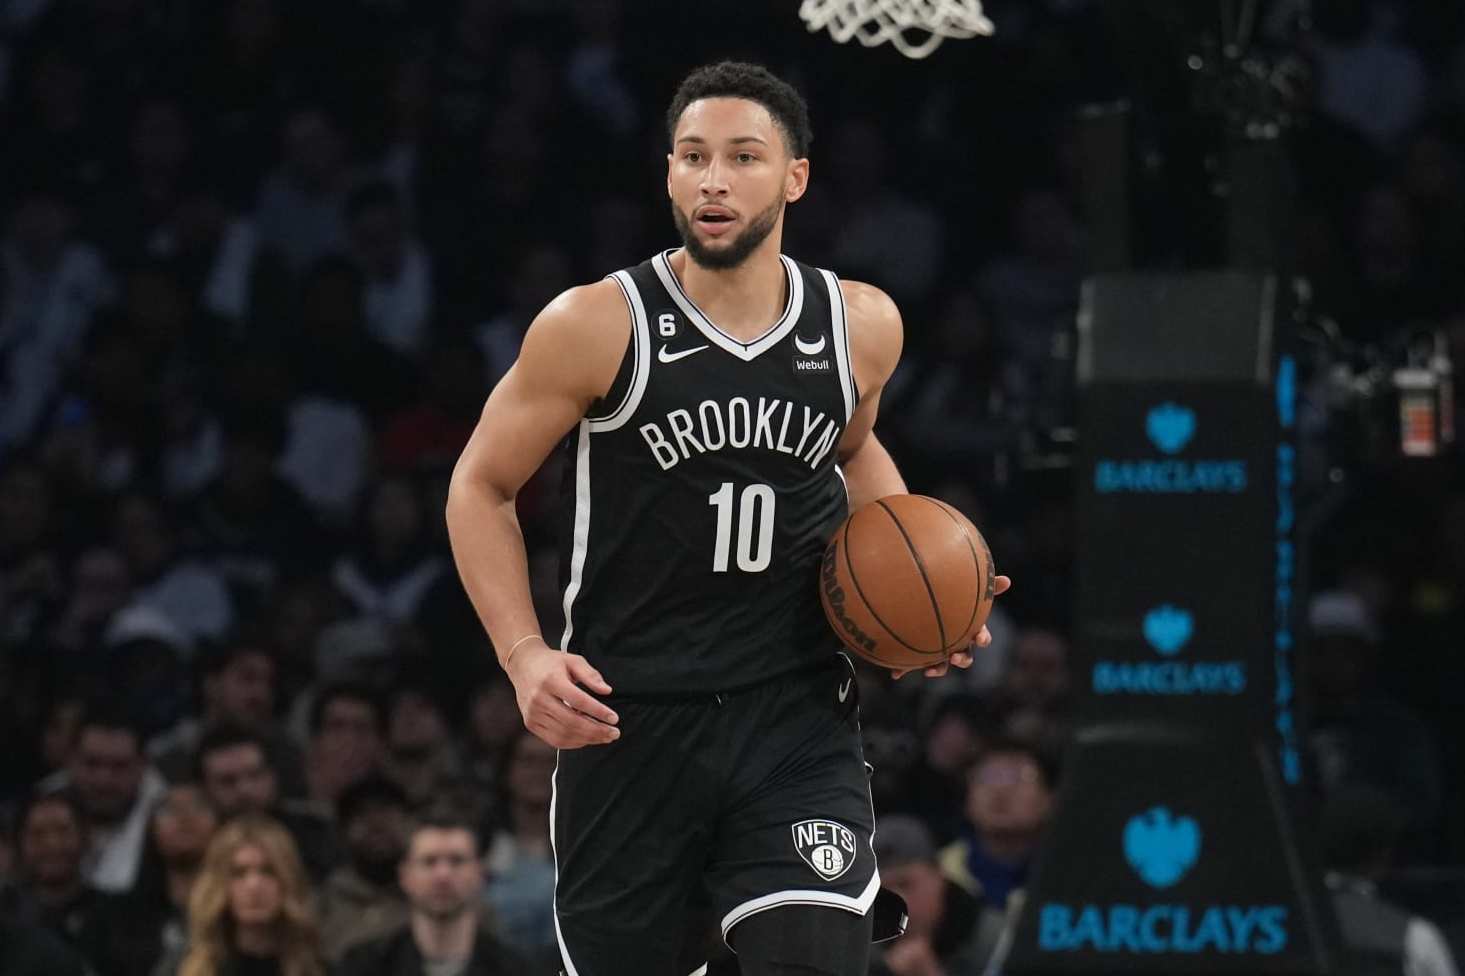 in final jersey sales data, Nets 'Big Three' all in Top 10; Team ranks No.  2 - NetsDaily